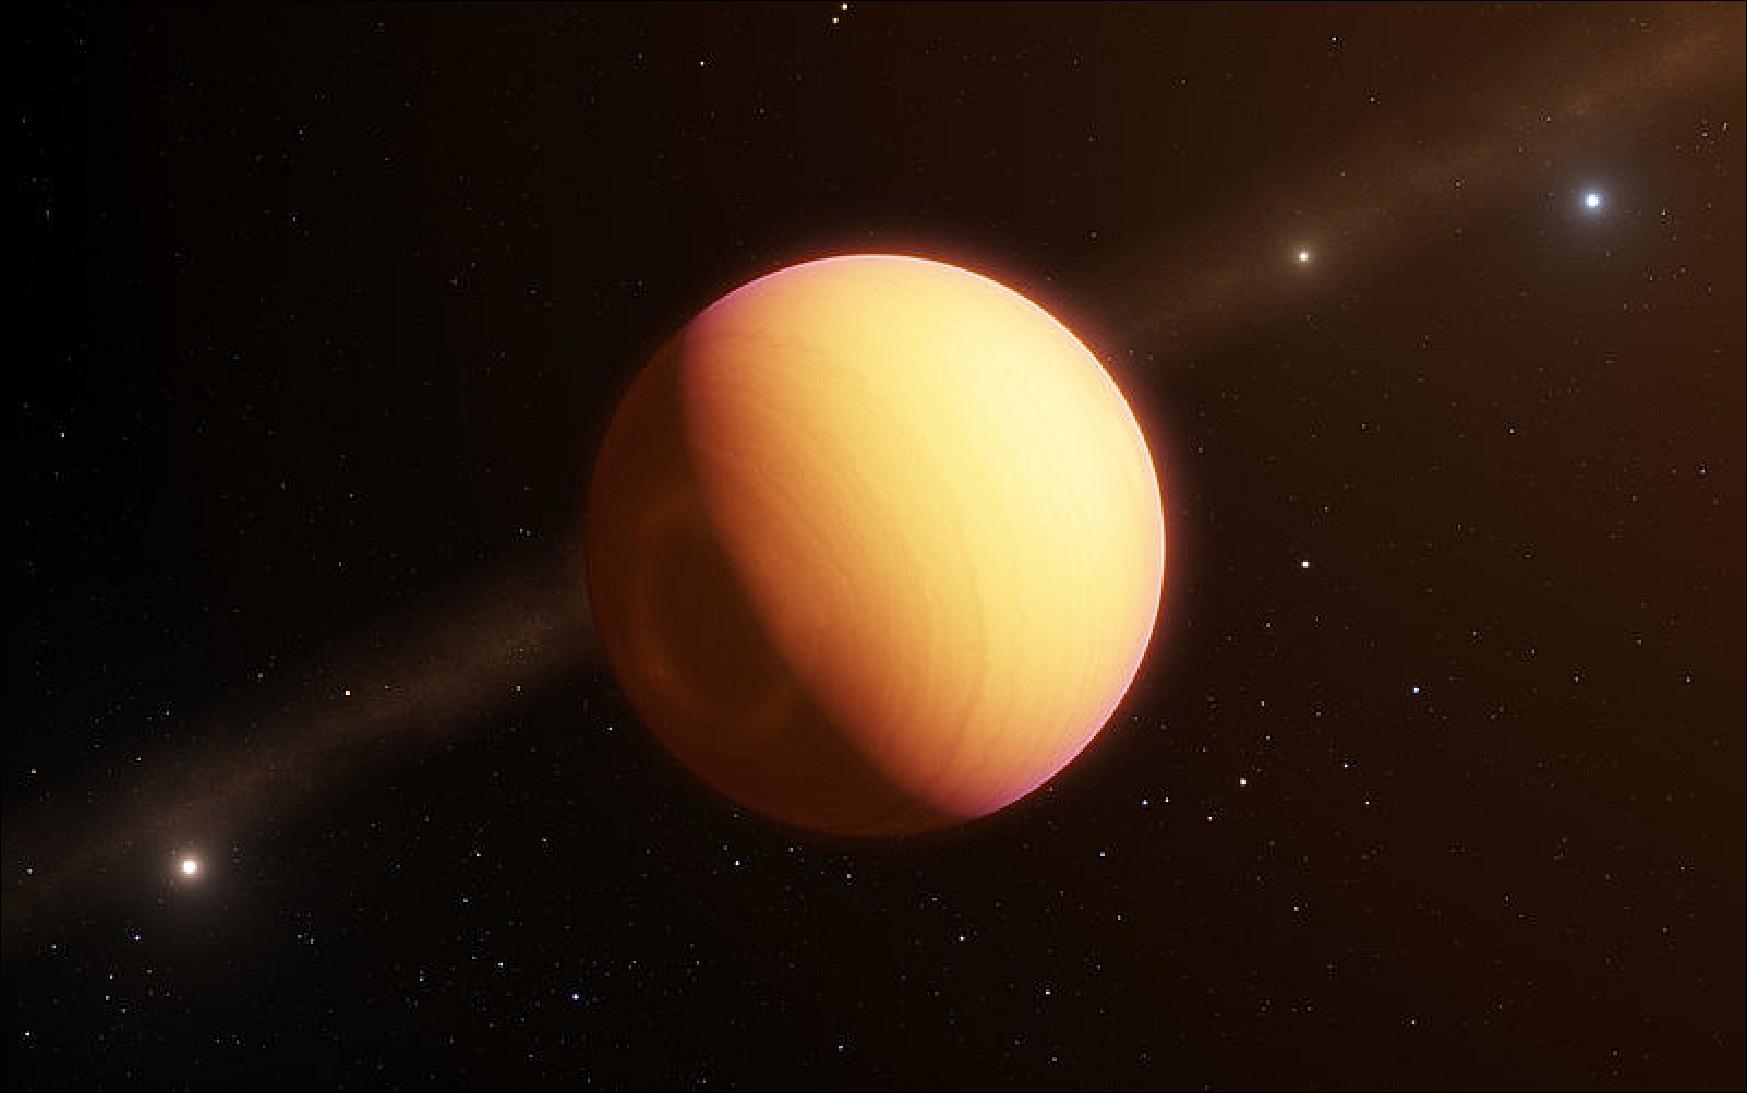 Figure 52: This artist’s impression shows the observed exoplanet, which goes by the name HR8799e. The GRAVITY instrument on ESO’s Very Large Telescope Interferometer (VLTI) has made the first direct observation of an exoplanet using optical interferometry. This method revealed a complex exoplanetary atmosphere with clouds of iron and silicates swirling in a planet-wide storm. The technique presents unique possibilities for characterizing many of the exoplanets known today. (image credit: ESO, Luis Calçada)